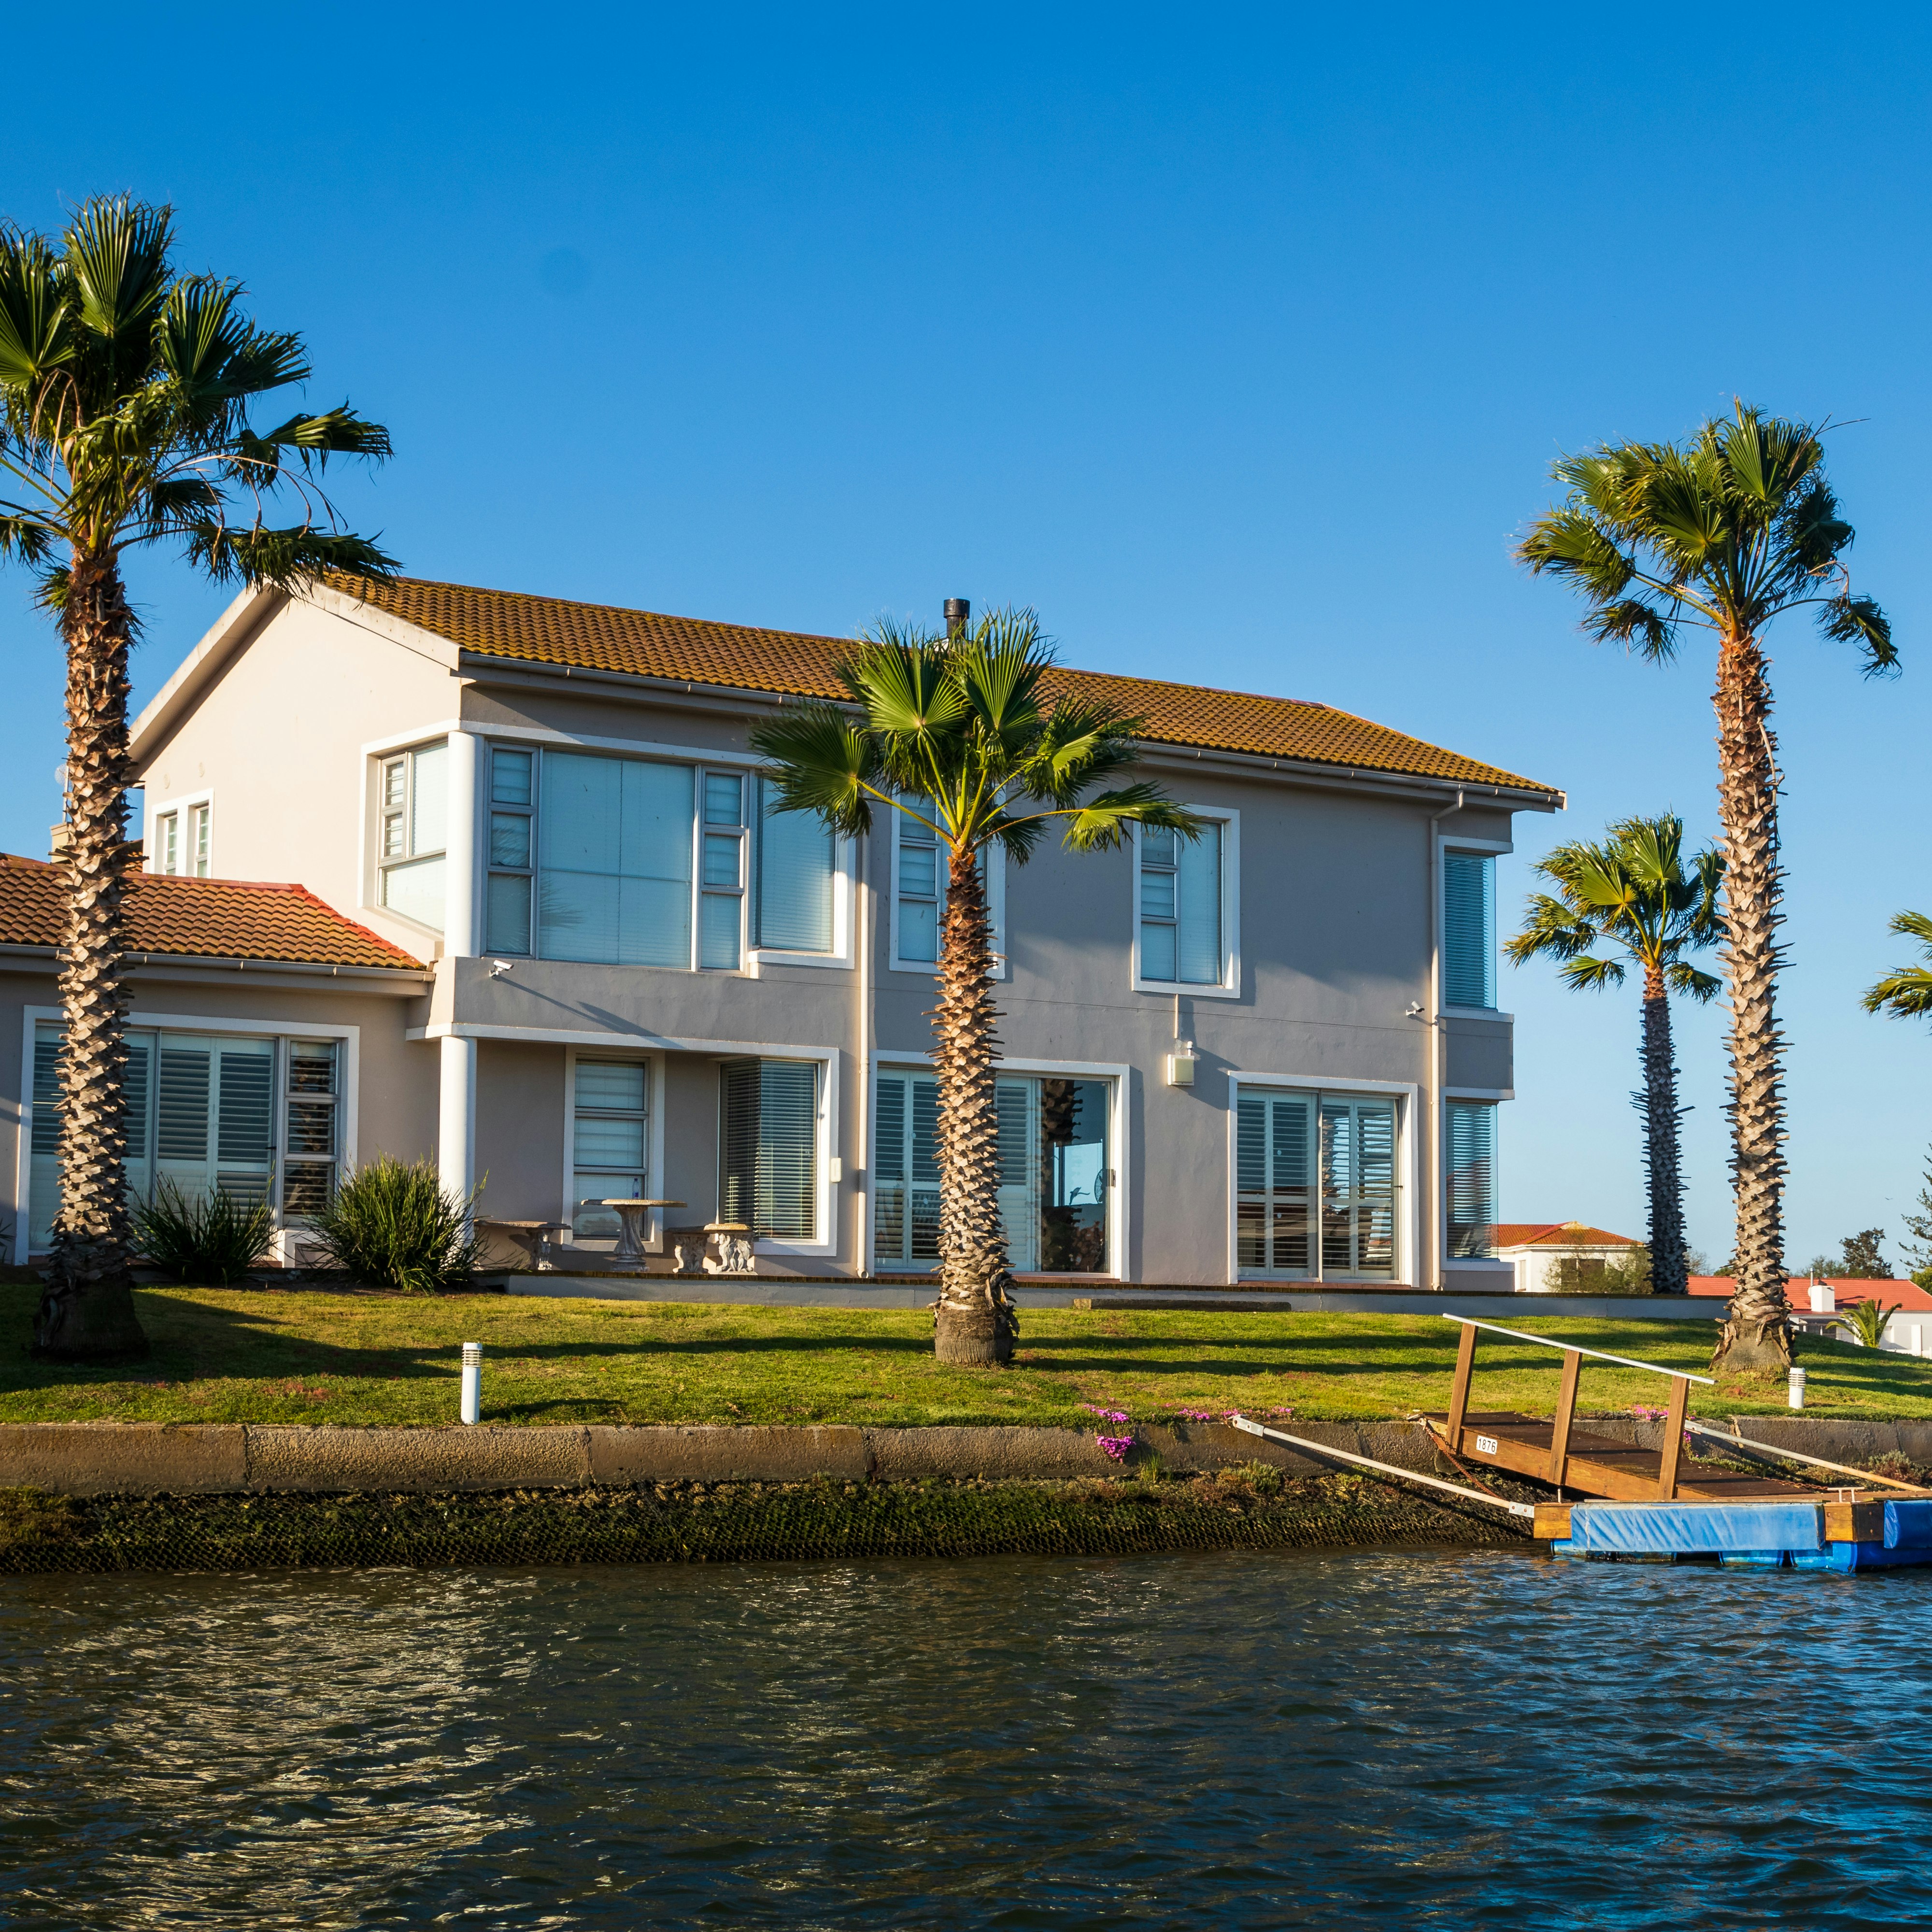 white and brown concrete house beside body of water during daytime